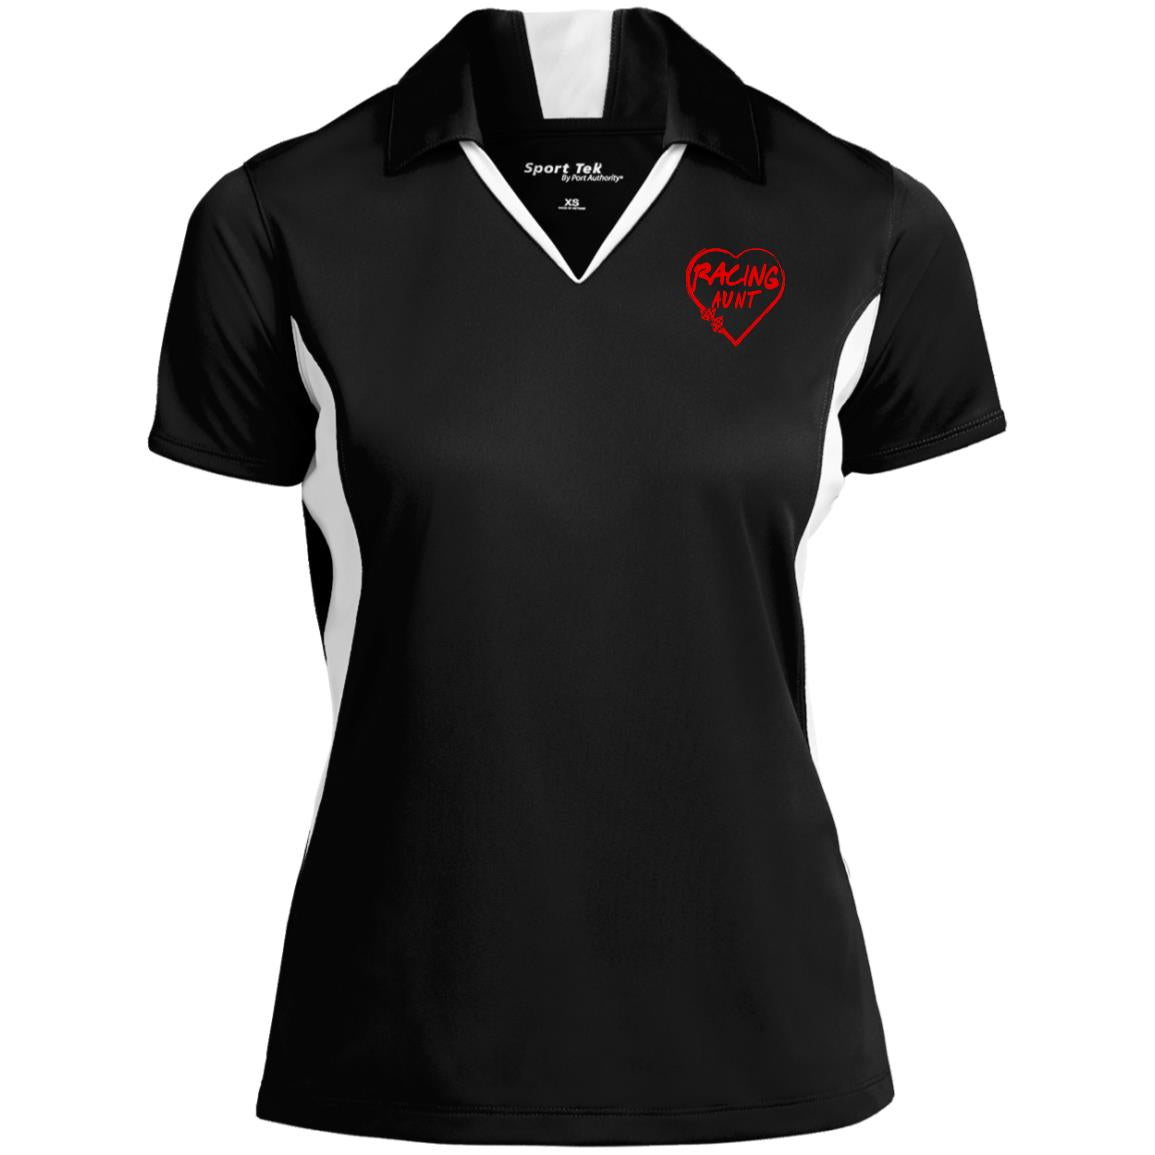 Racing Aunt Heart Ladies' Colorblock Performance Polo